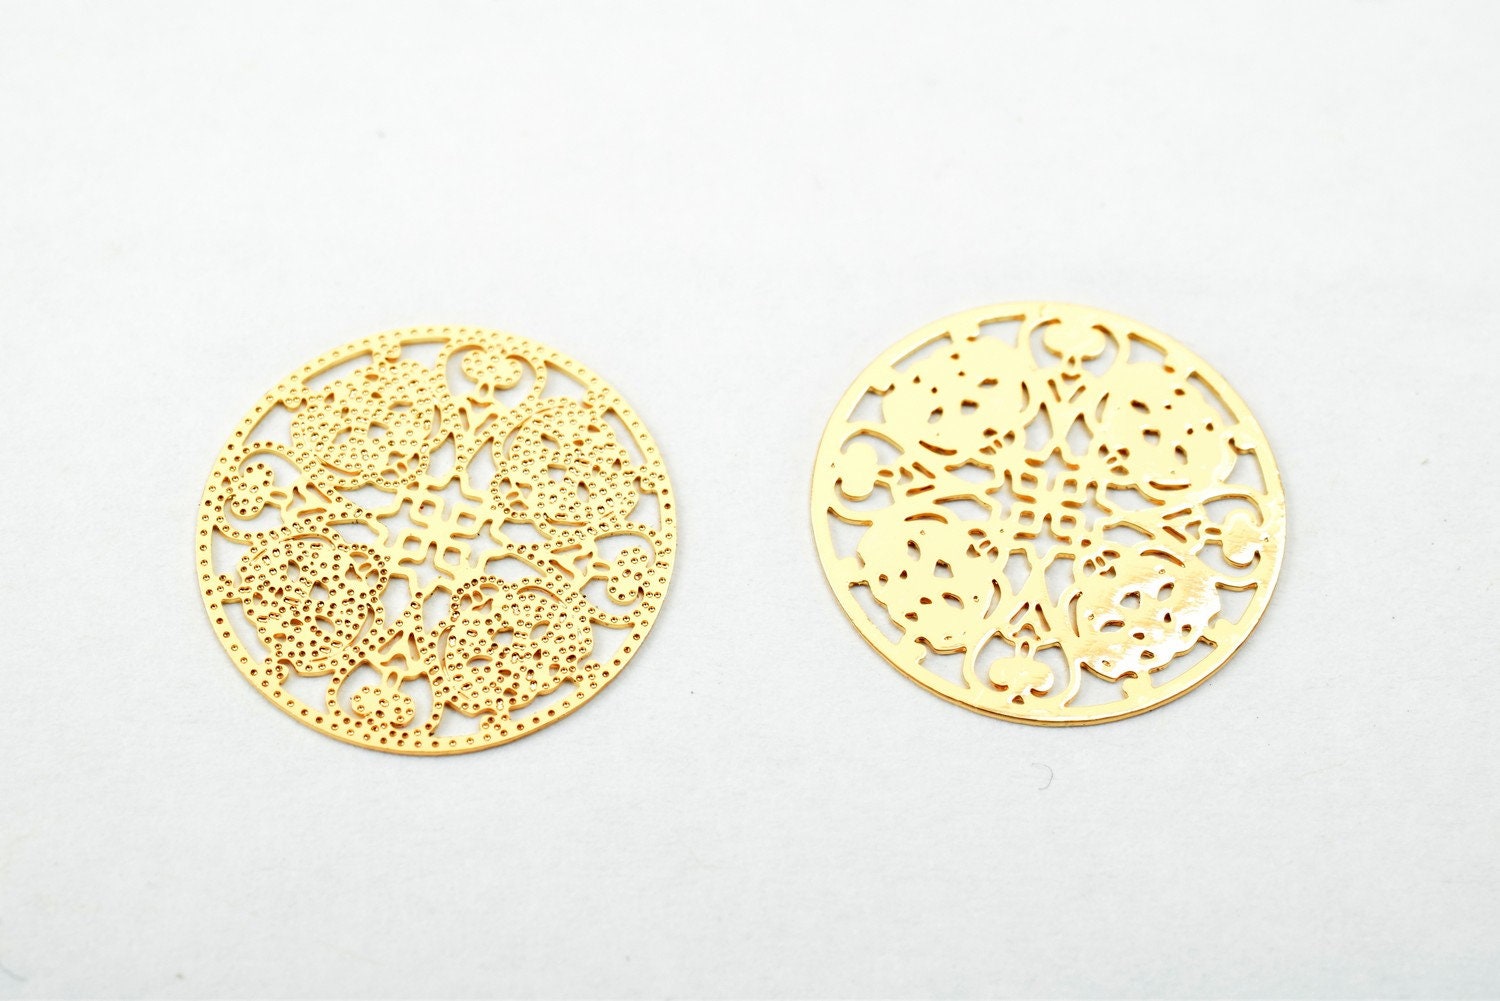 6 PCs Dainty Thin 18K Pinky as Gold Filled tarnish resistant Filigree Flower Connector Size 15mm Thickness 0.25mm For Jewelry Making DGF17